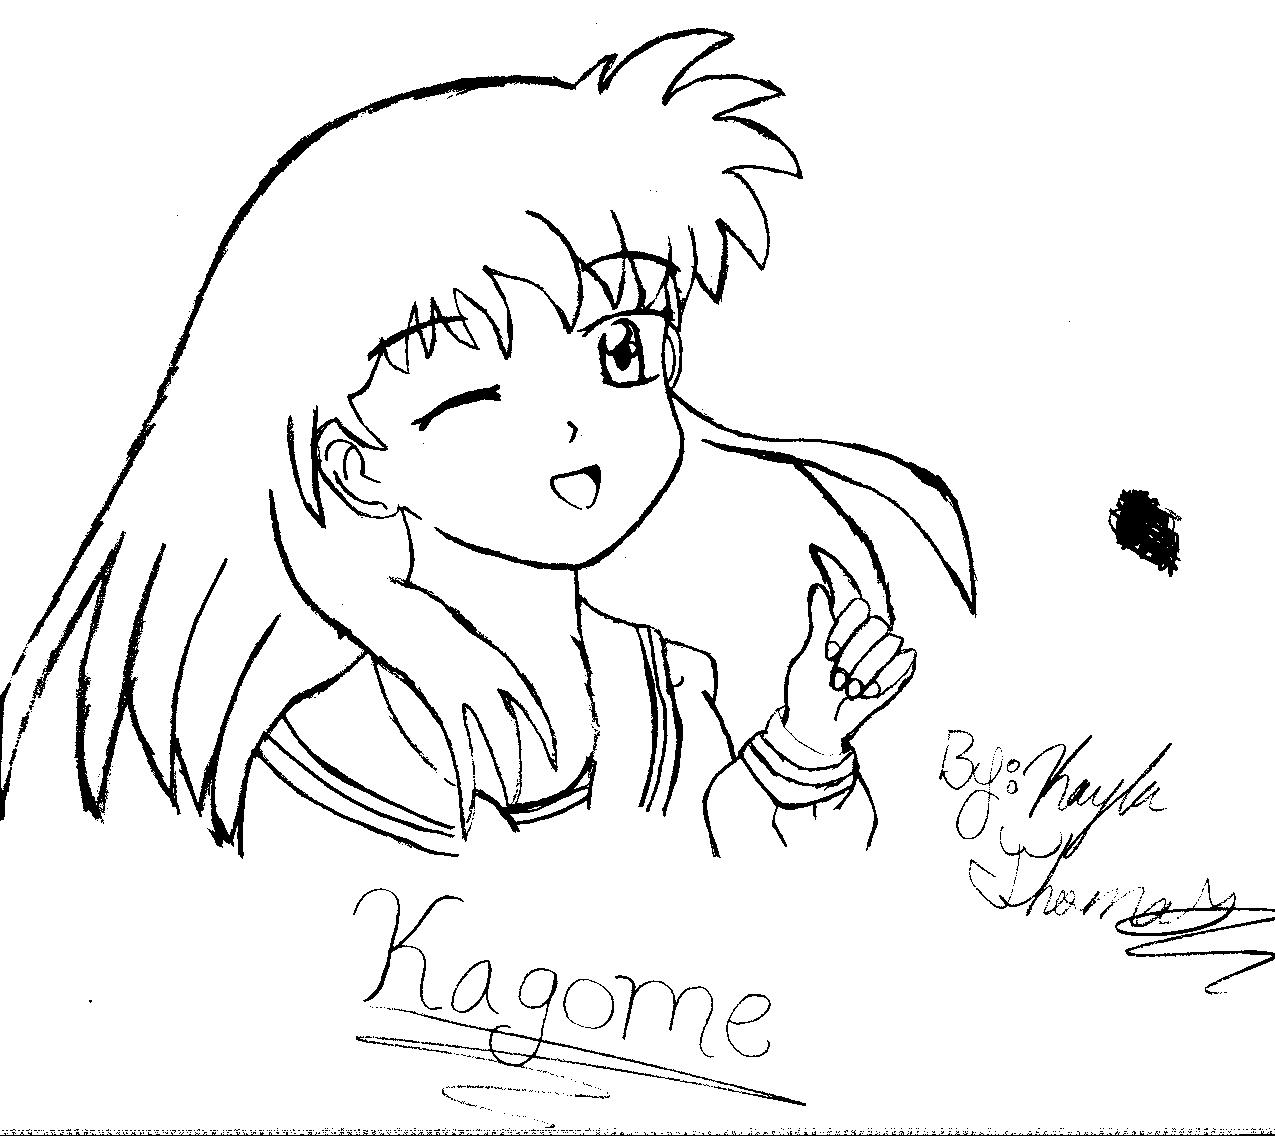 kagome by gamergirl2